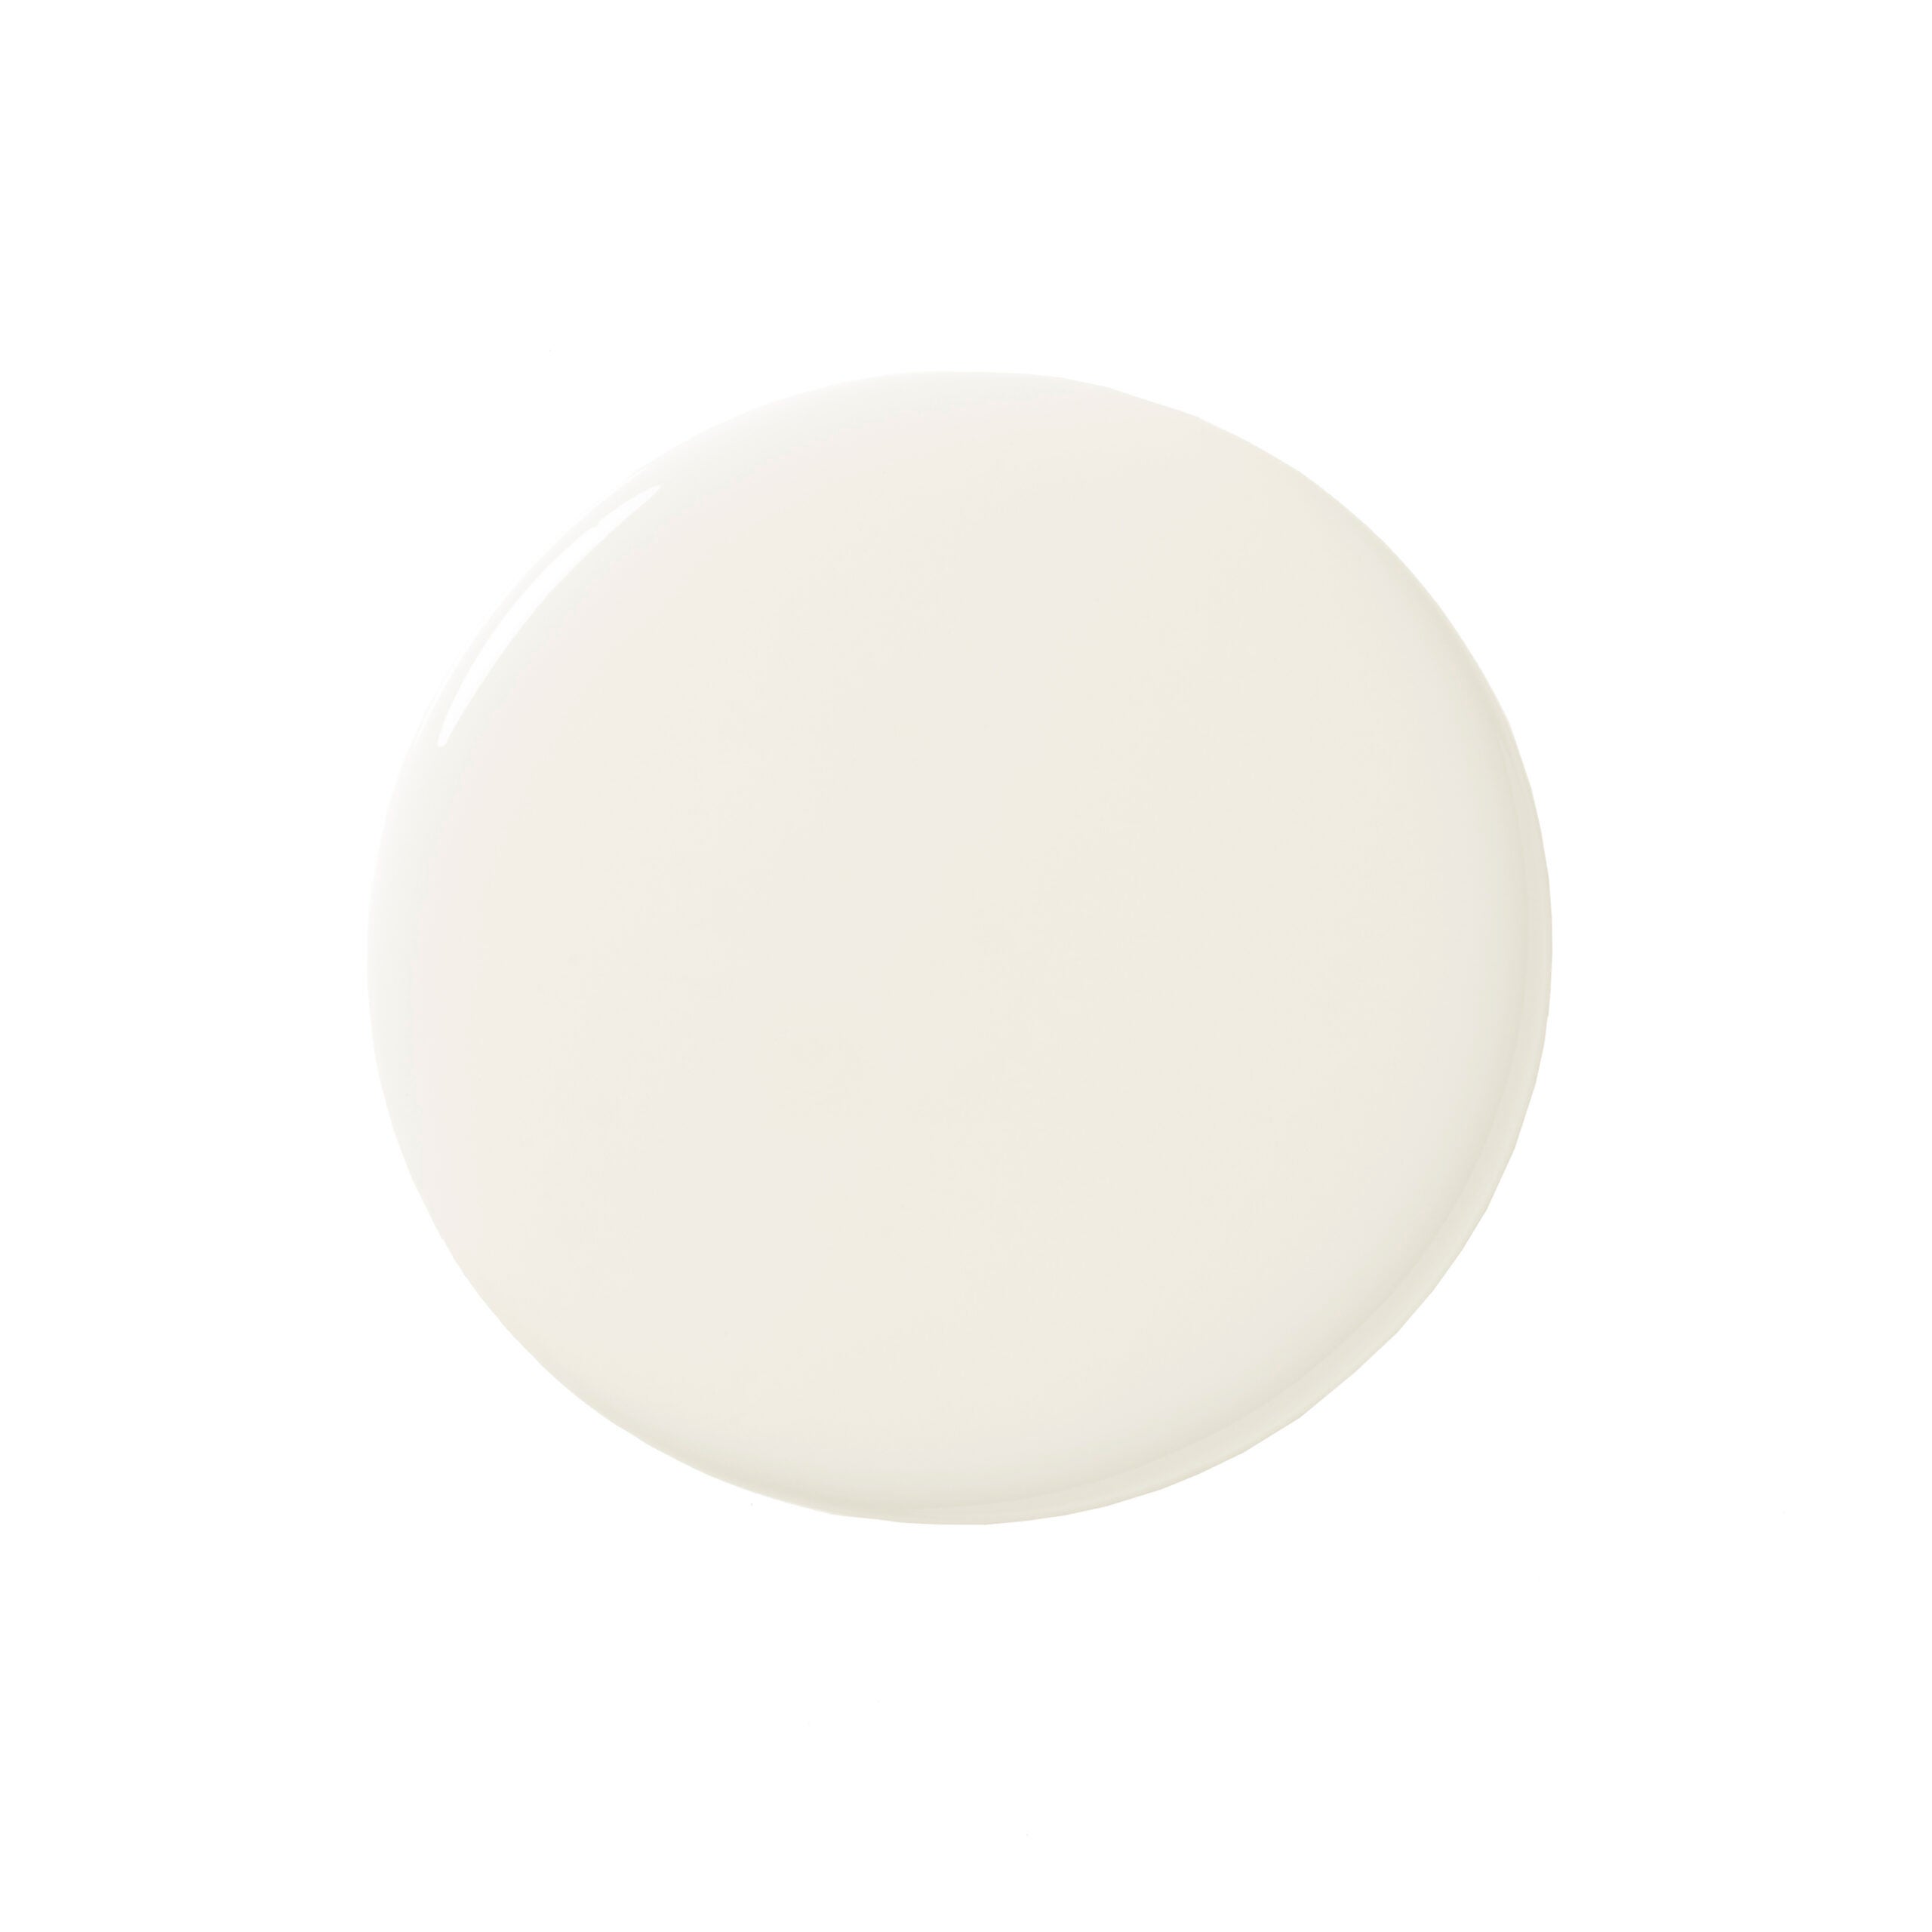 I Sampled 24 White Paints—Here’s the One I Chose for Every Room of My Home